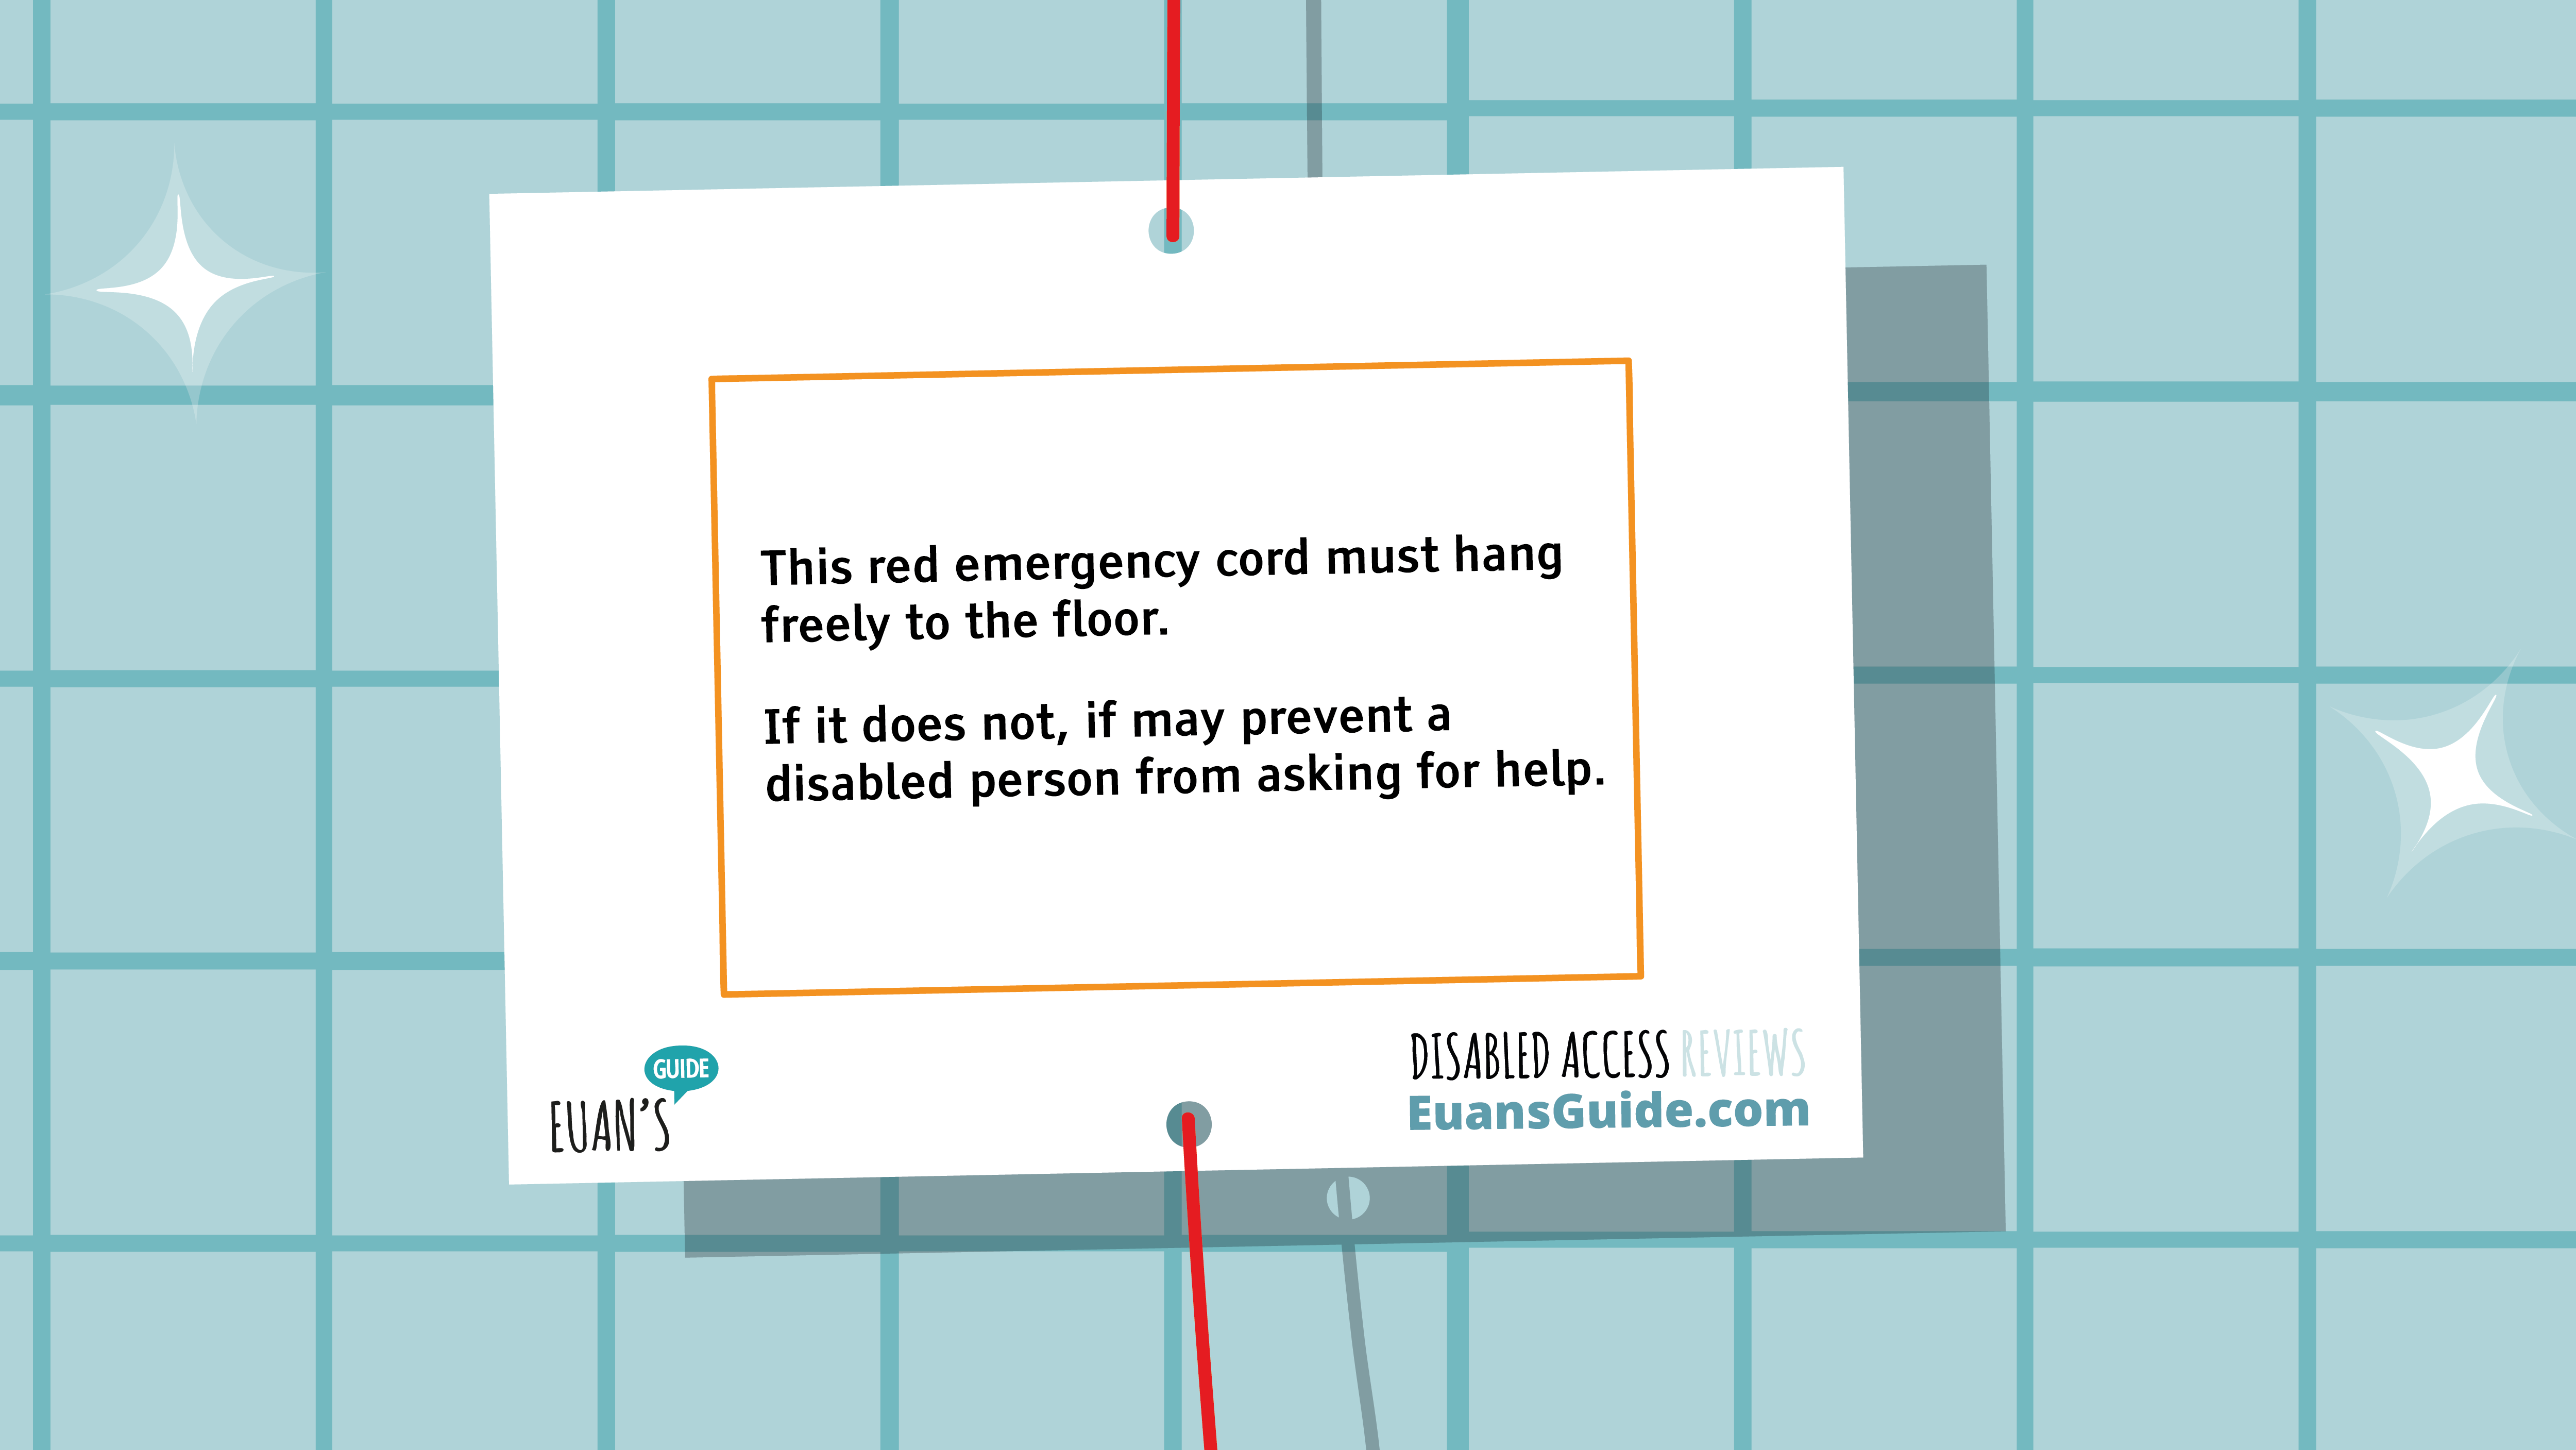 A Red Cord Card dangling on a red emergency cord that reads: "This red emergency cord must hang freely to the floor. If it does not, it may prevent a disabled person from asking for help."